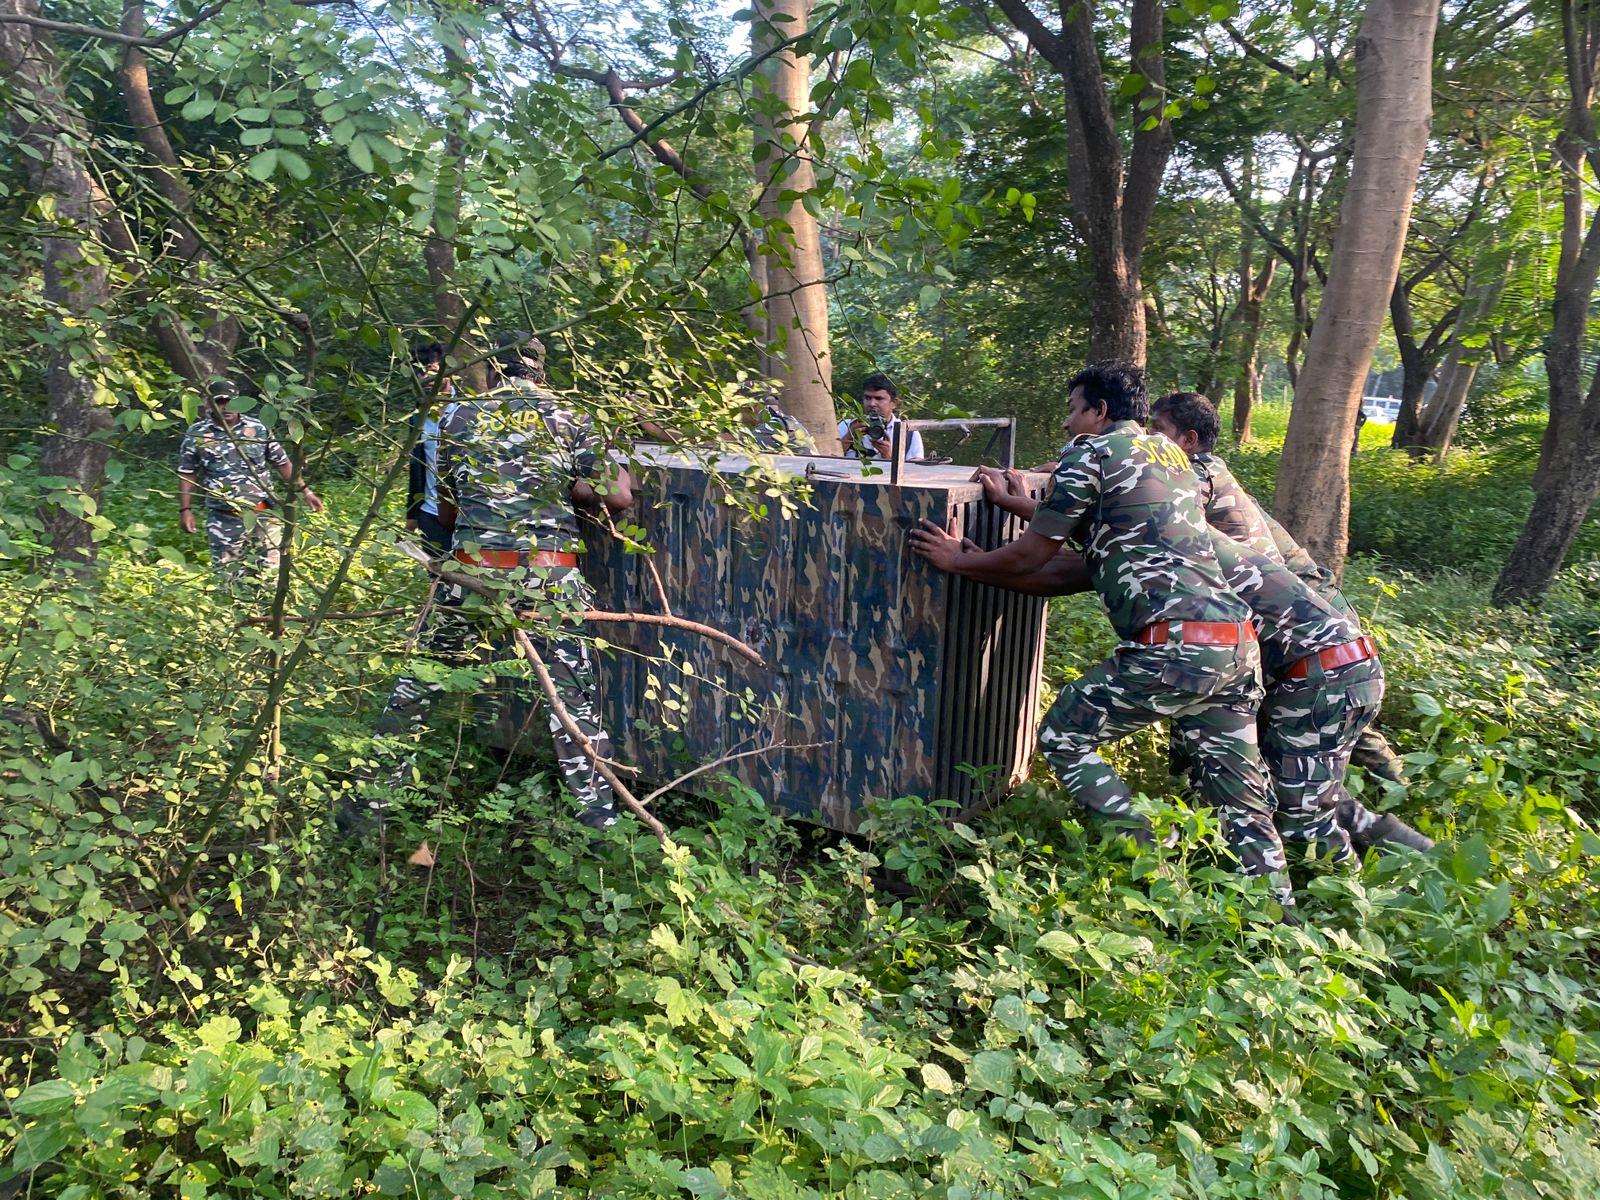 Leopard C-55 walked into a cage in the early hours of Wednesday, said officials Pic/Kunal Chaudhari